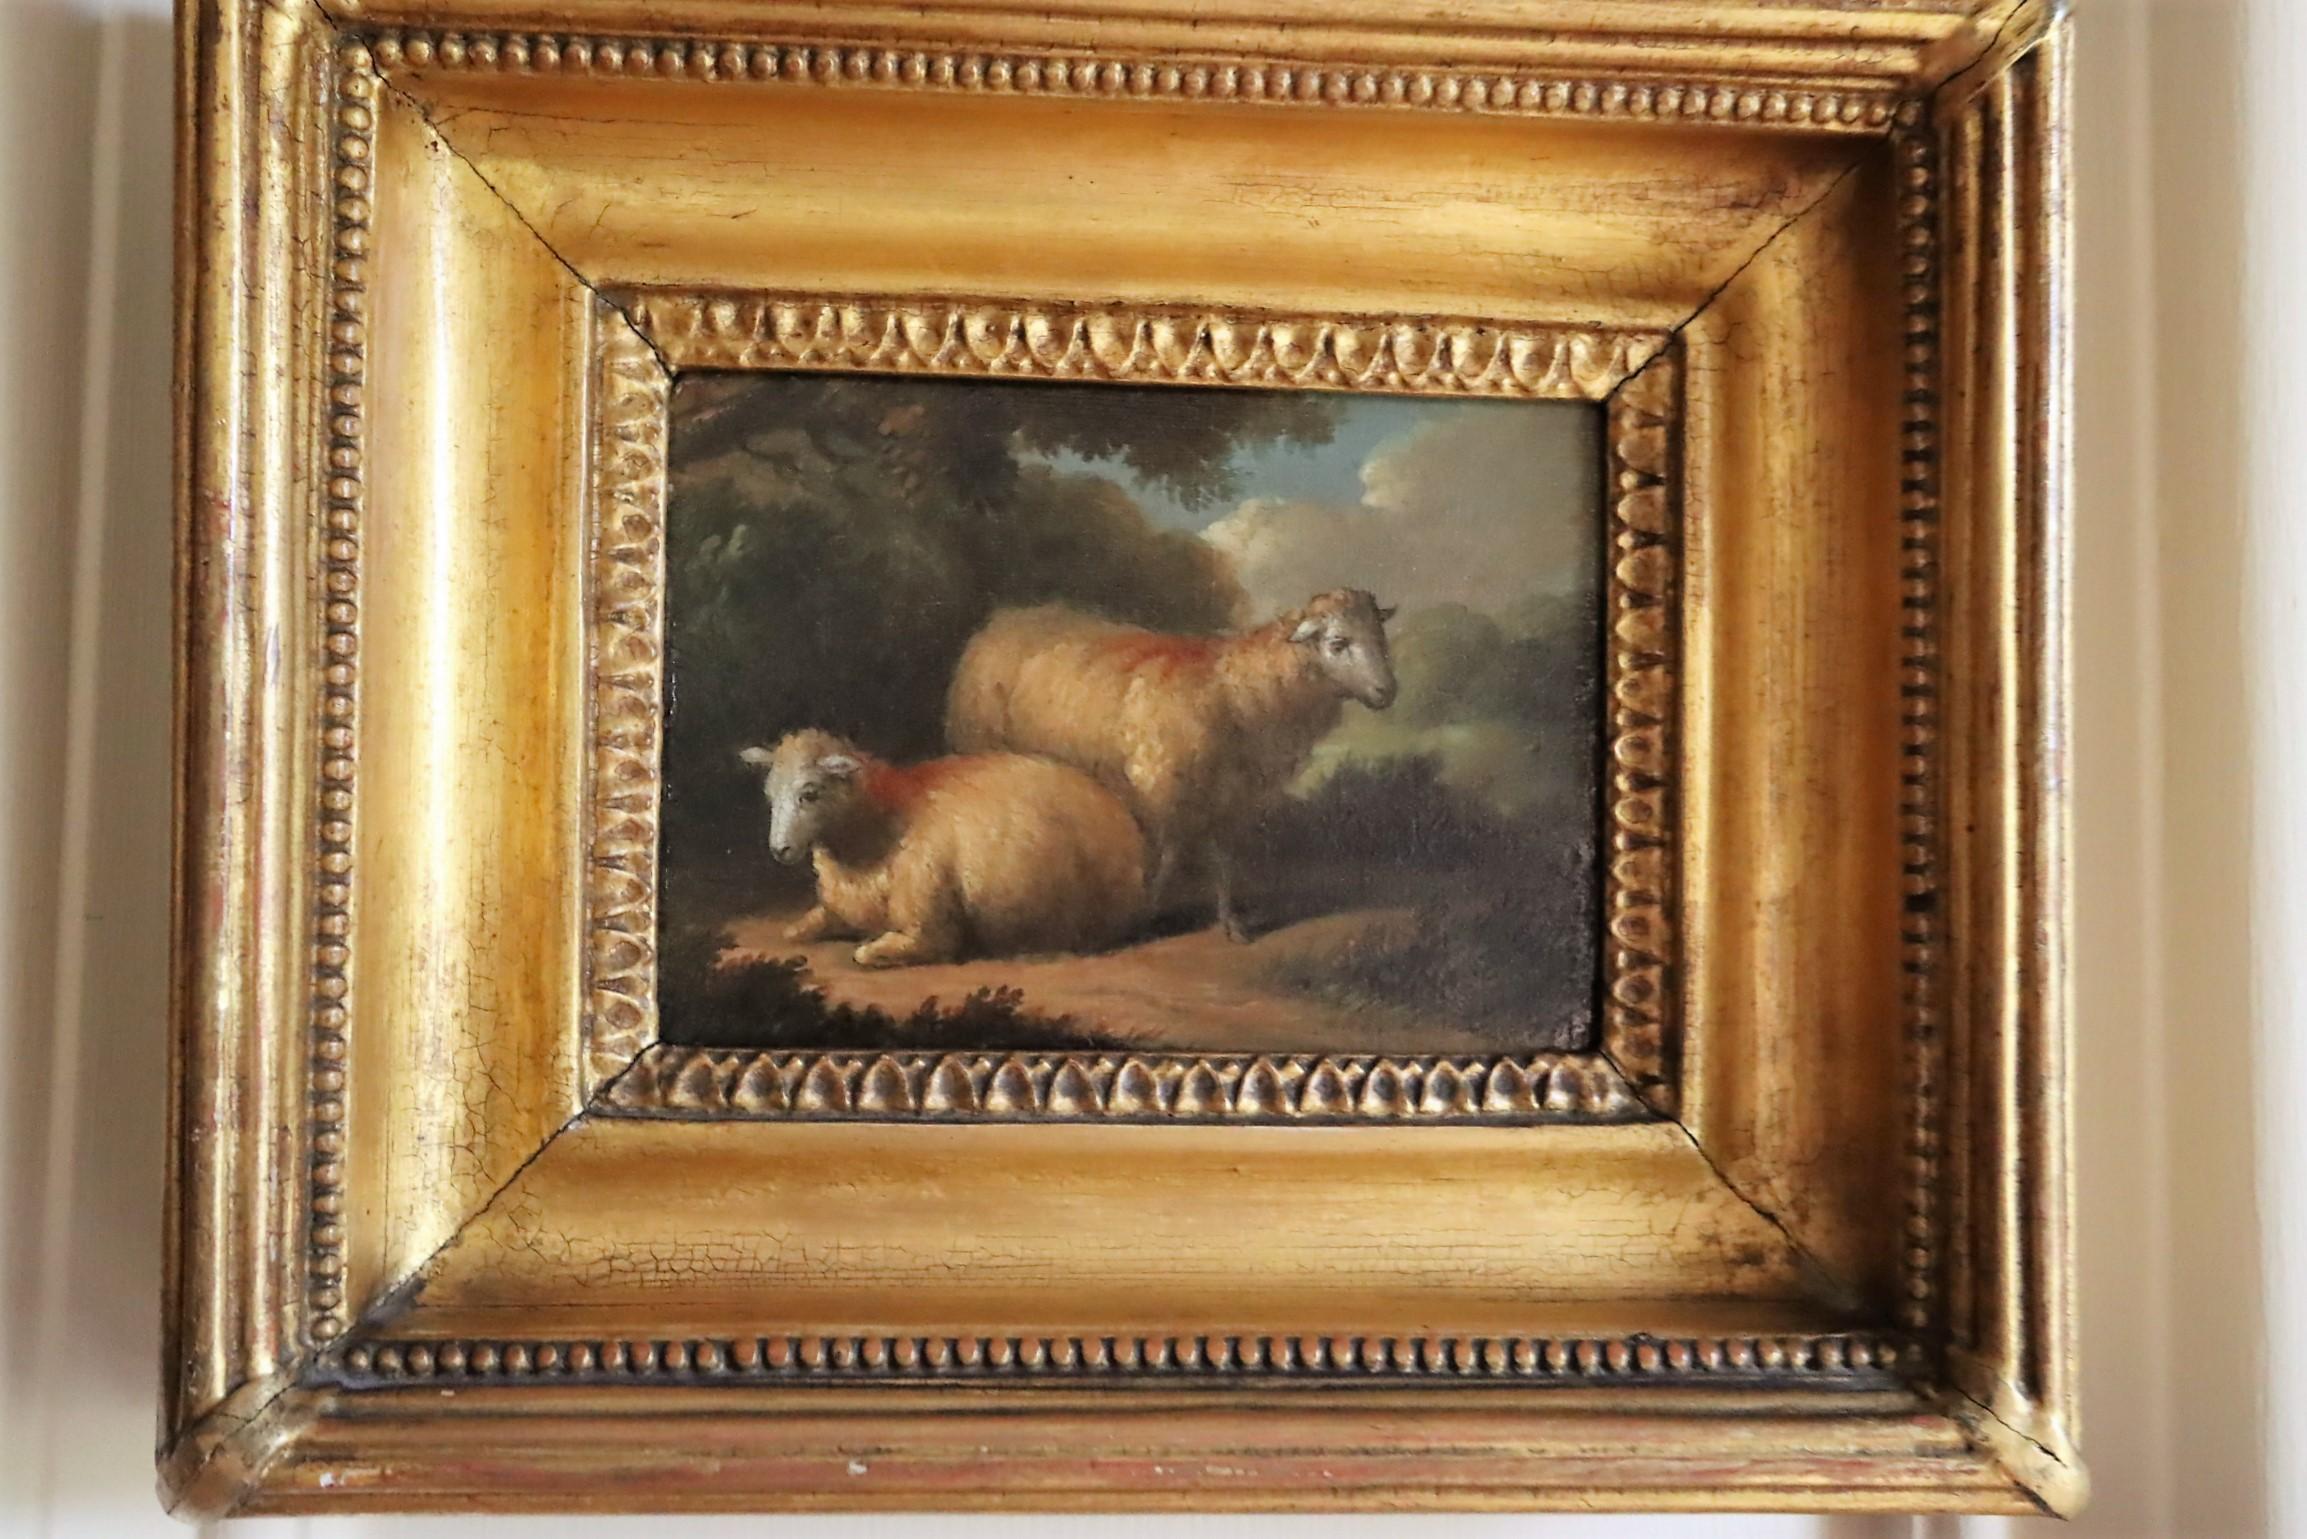 George Morland
A Pair of wonderful paintings one of 2 sheep and one of 2 Spaniels.
Oil on Panel
4 1/2 x 6 1/4 inches Canvas
8 1/2 x 10 inches Framed
GM.